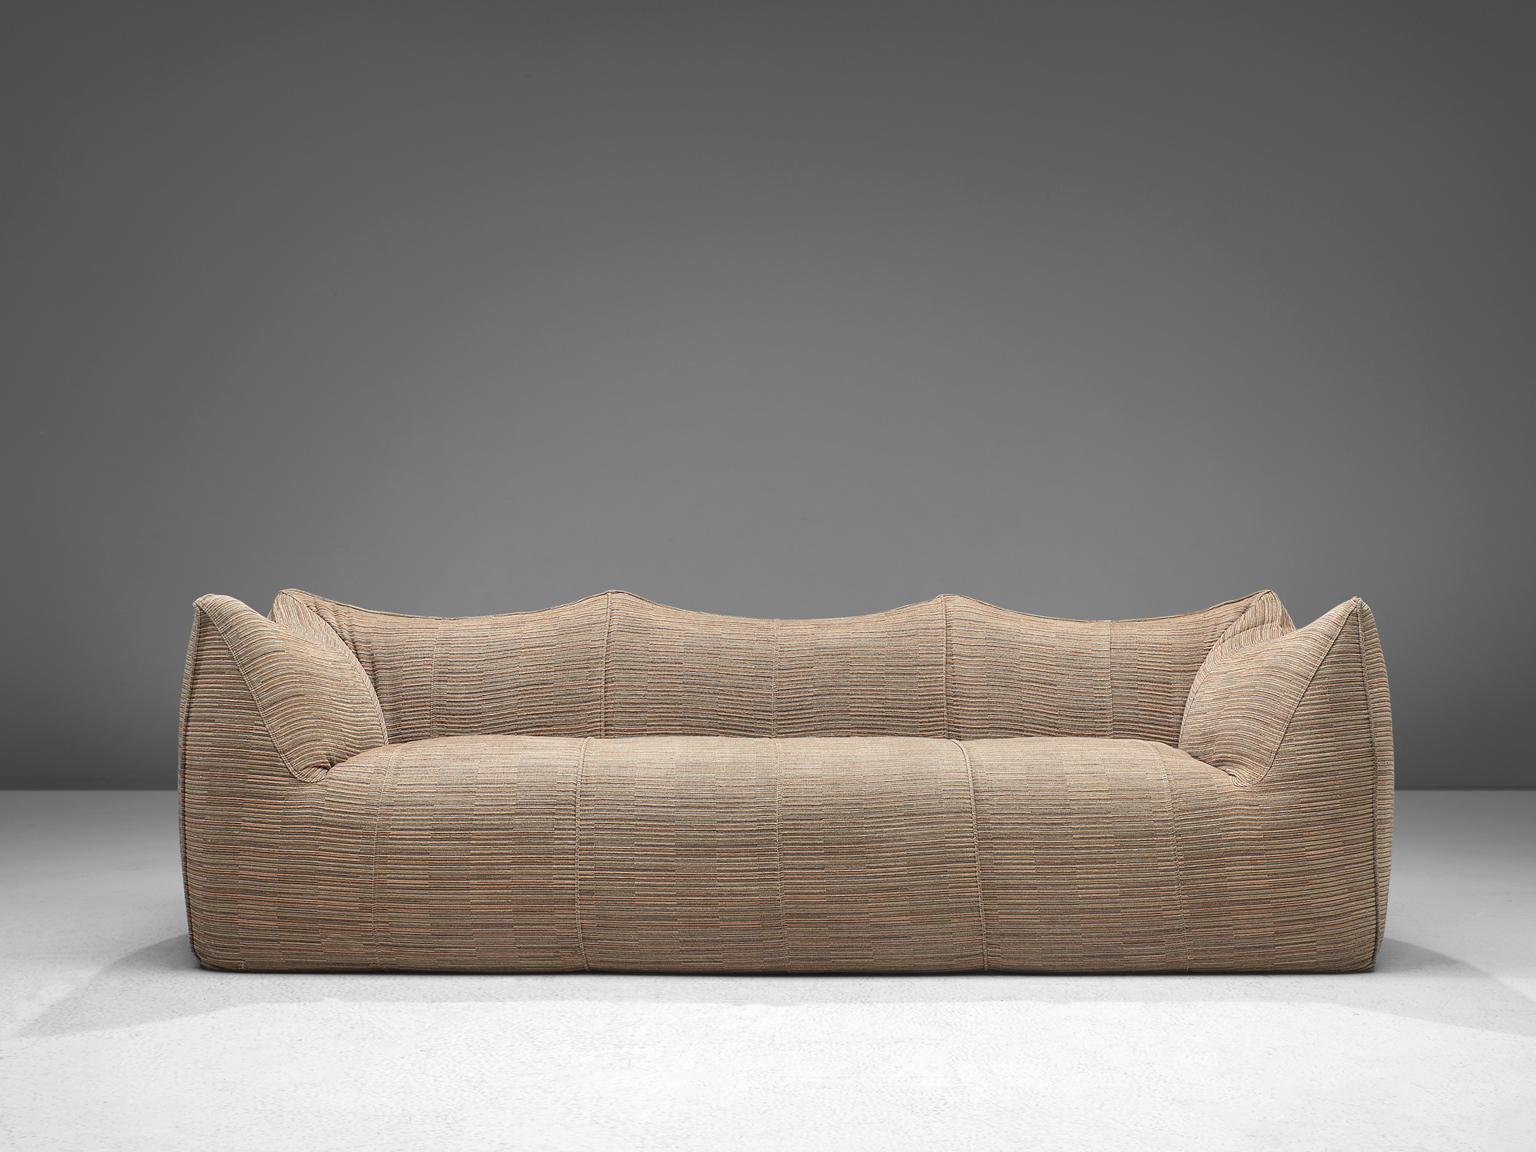 Mario Bellini for B&B Italia, 'Le Bambole' sofa, fabric, Italy, 1972. 

This comfortable beige three seat sofa is bulky and playful, shaped as if it is merely a large cushion and the accompanying feeling is the same. It is designed by Mario Bellini